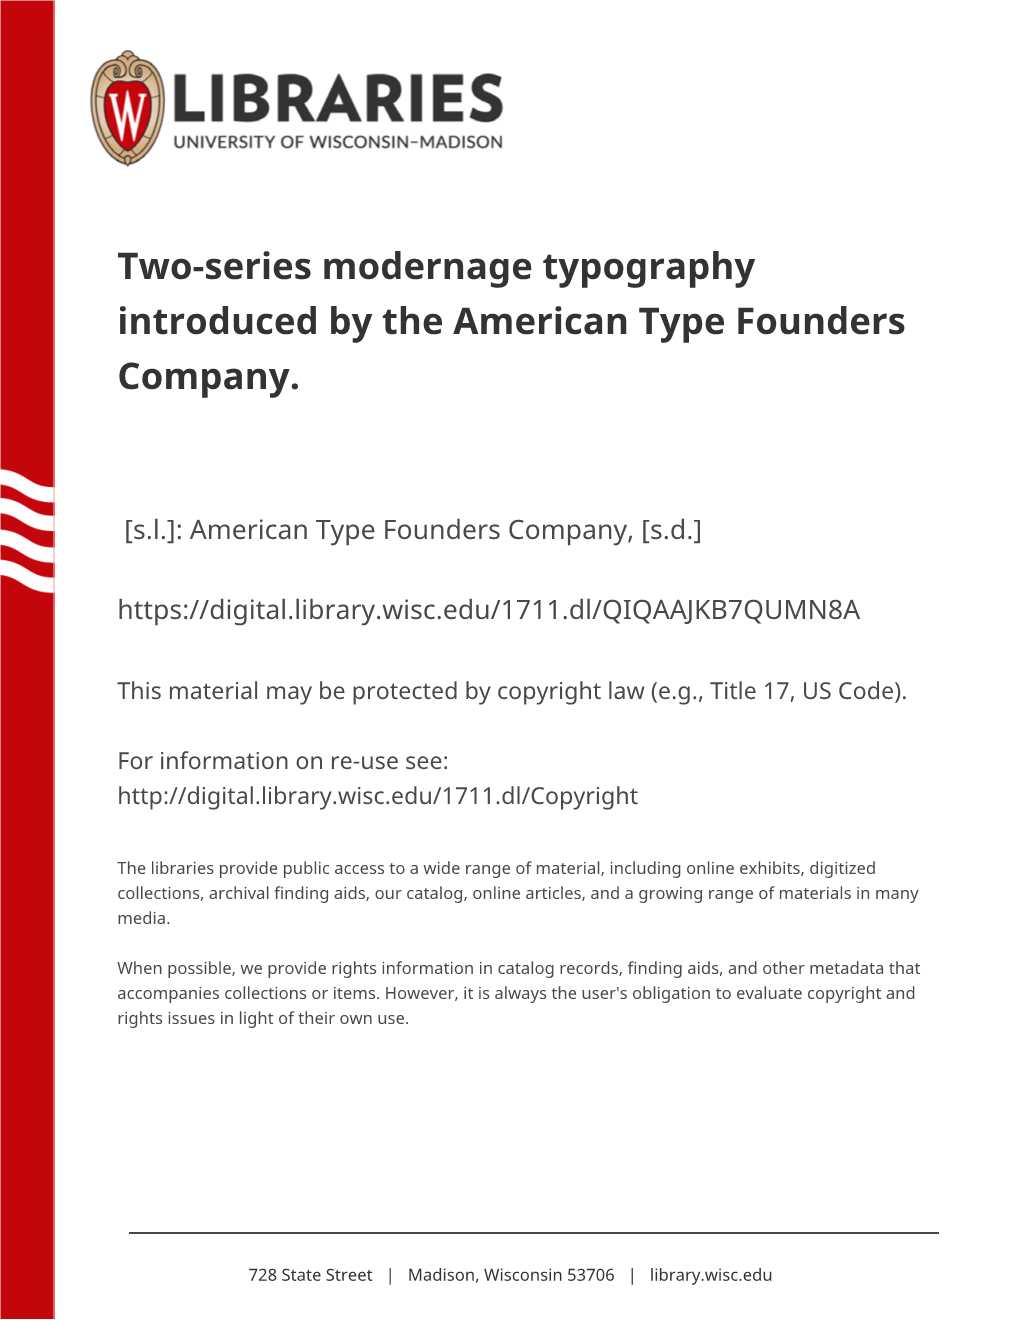 Two-Series Modernage Typography Introduced by the American Type Founders Company